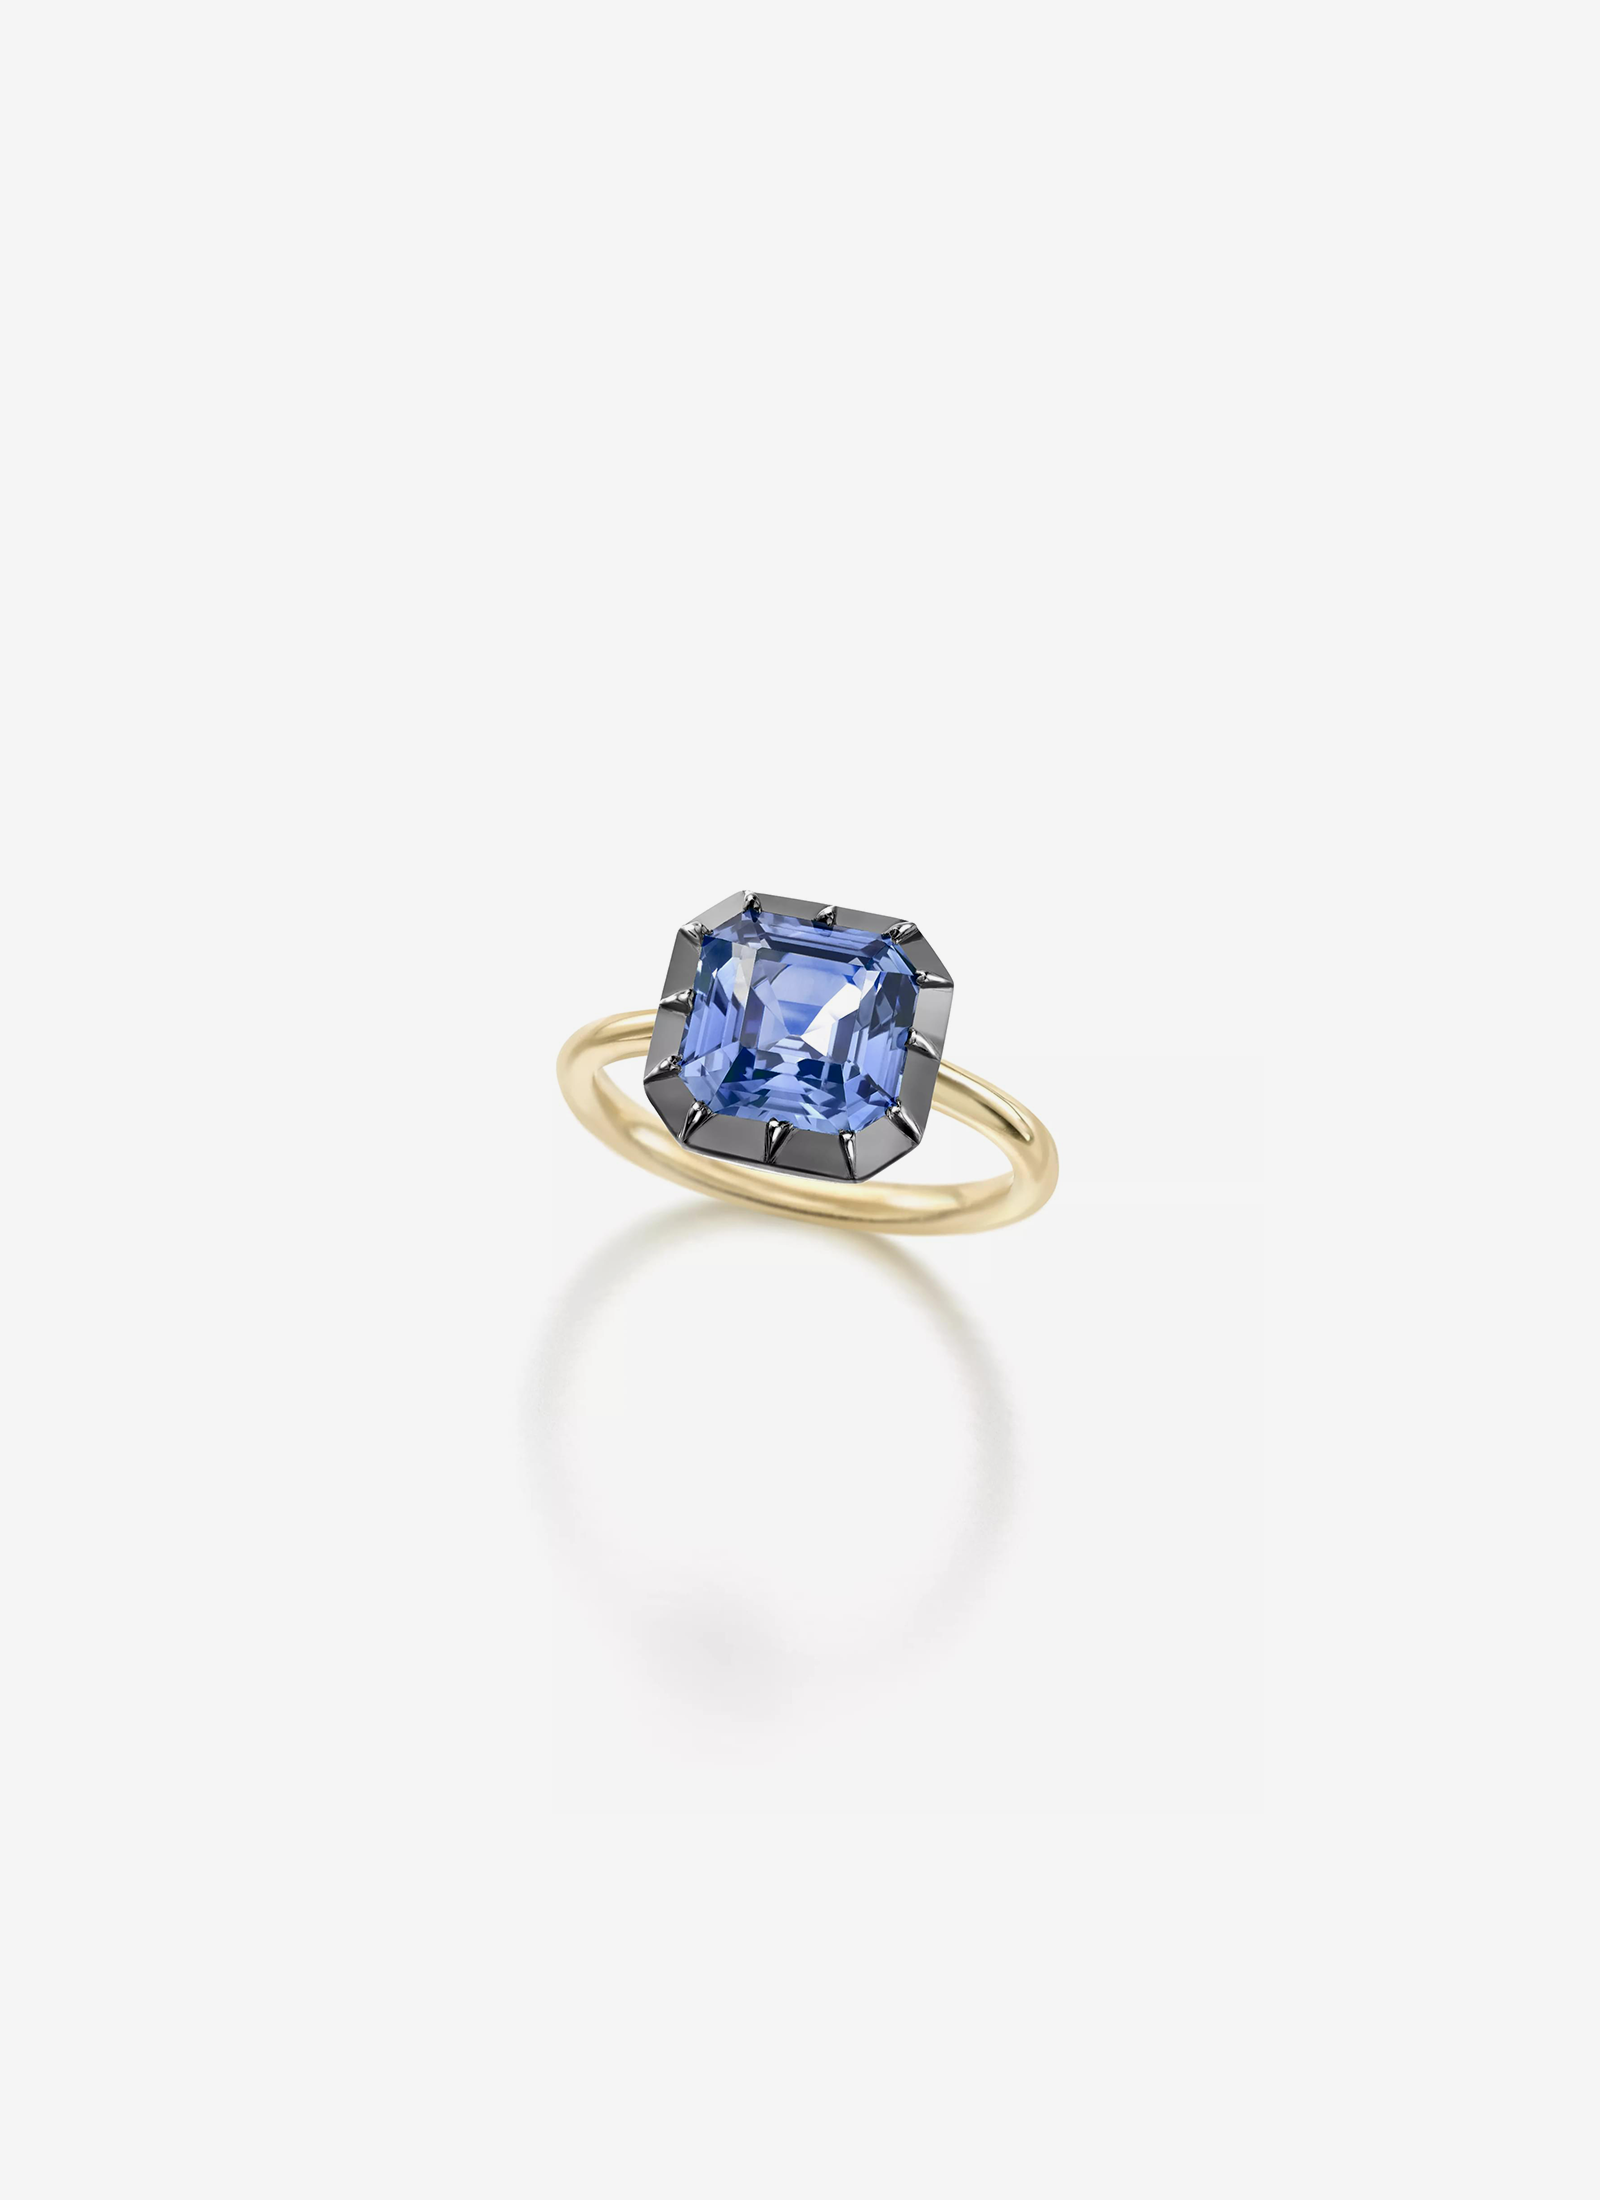 Signature Sapphire Ring - Emerald Cut 2.36ct Sapphire East-West Button Back Ring